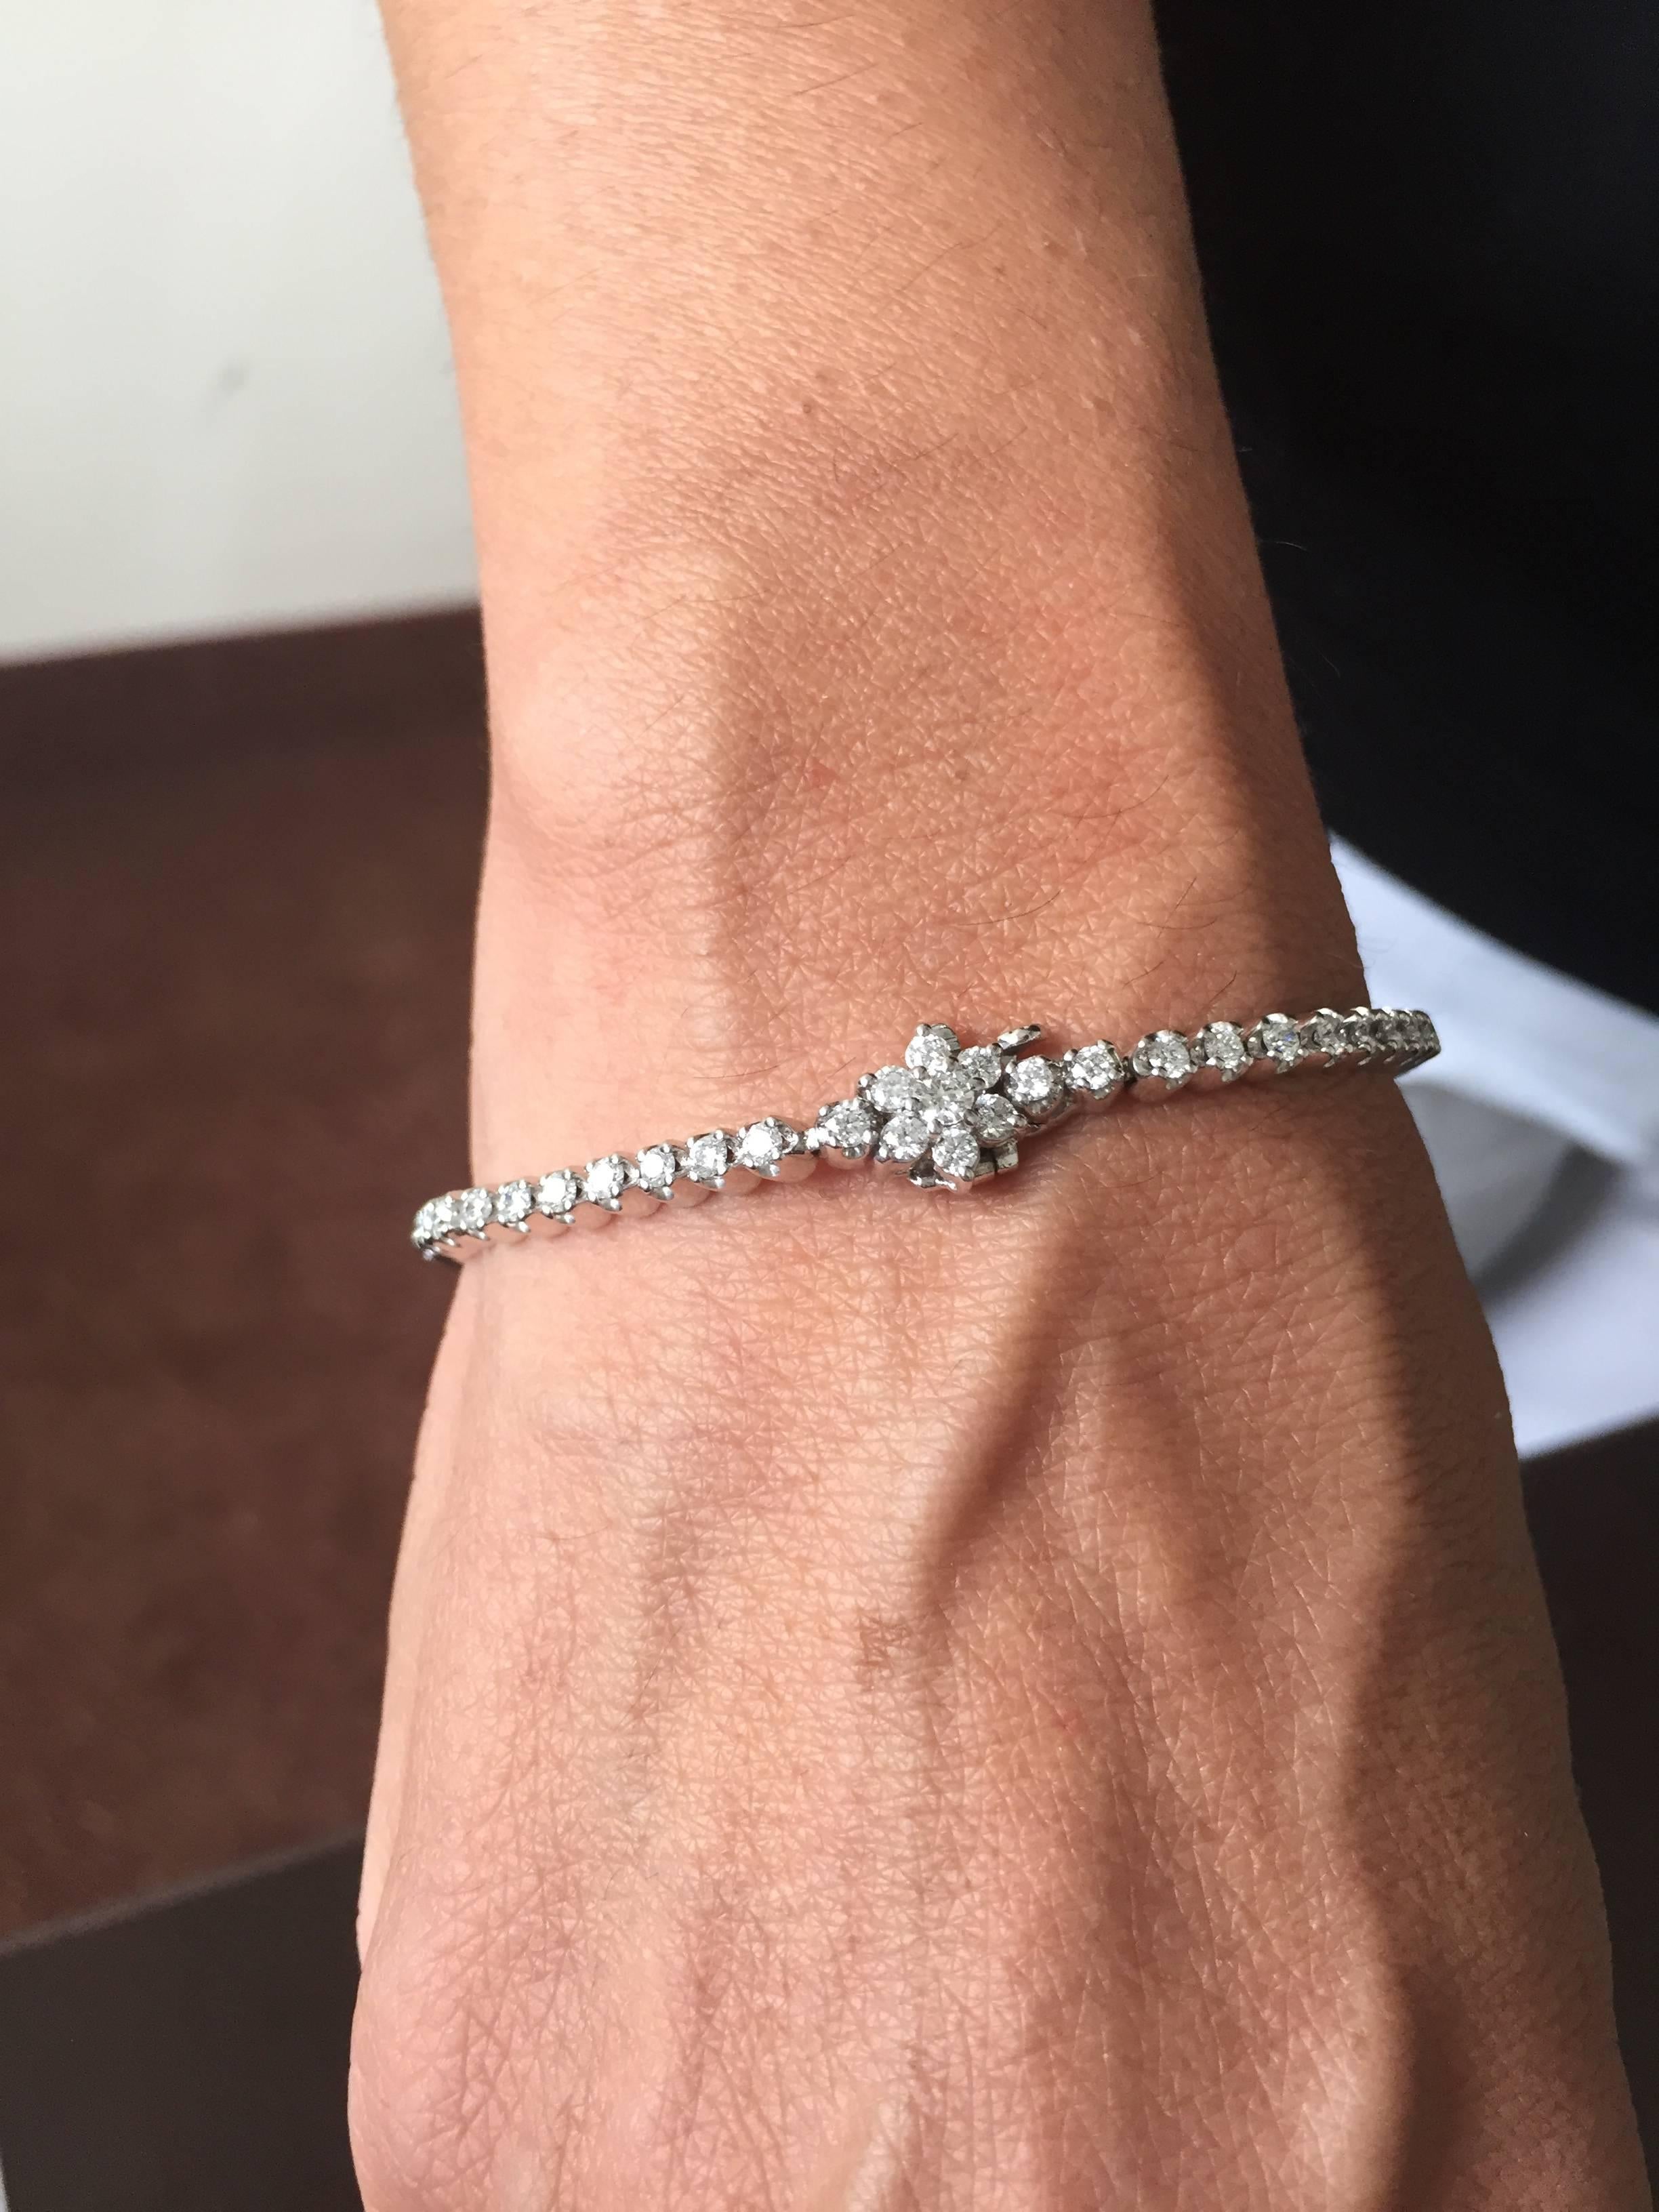 This elegant Tennis Bracelet is tied together with a unique flower clasp. The flower clasp is truly a statement turning an ordinary Tennis Bracelet into something very special.